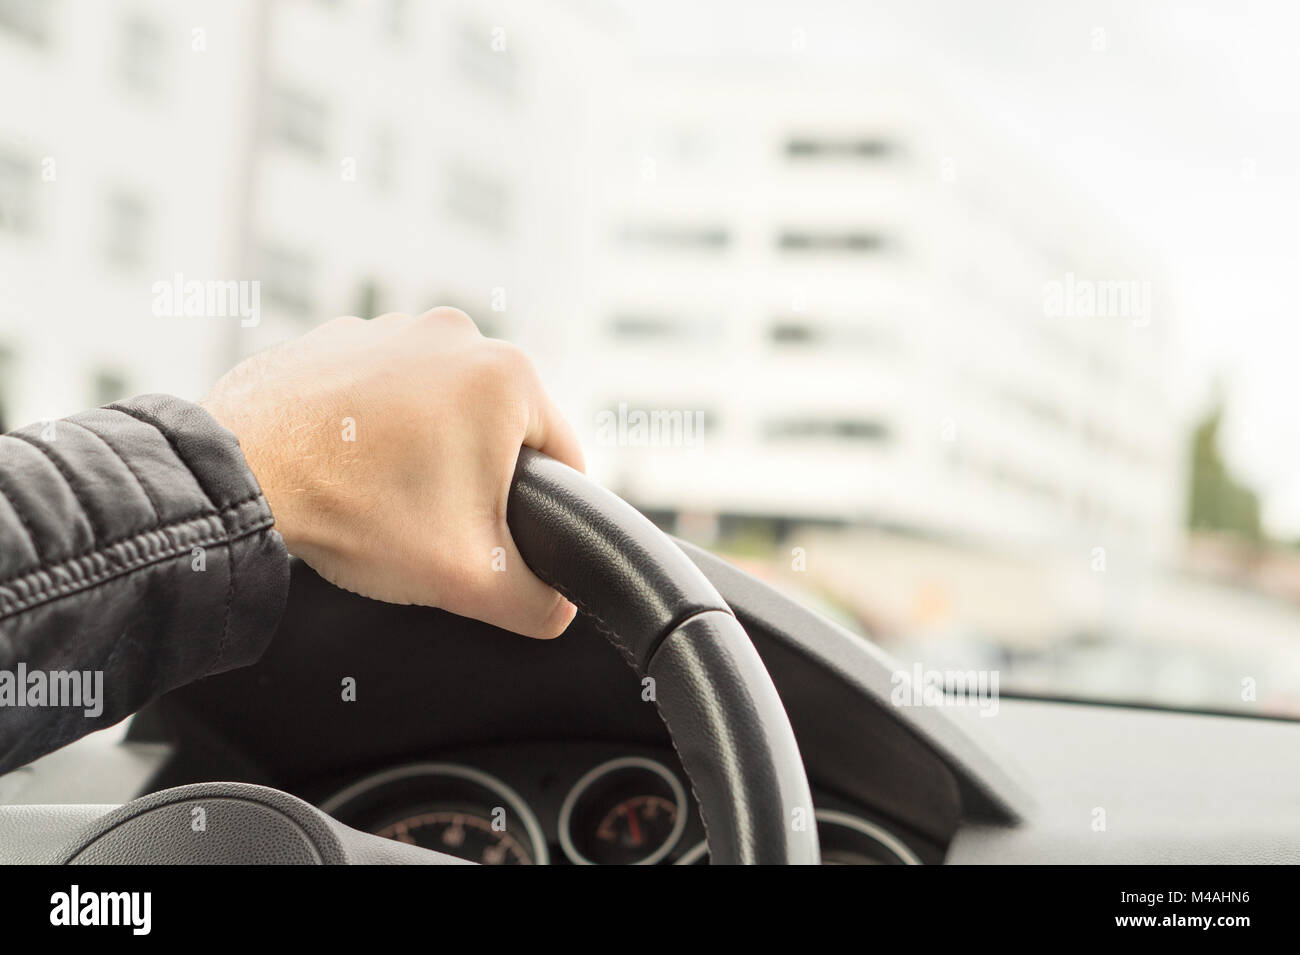 Driver holding steering wheel with one hand. Man driving car in city. Road trip, travel or commute concept. Buildings in the blurred background. Stock Photo